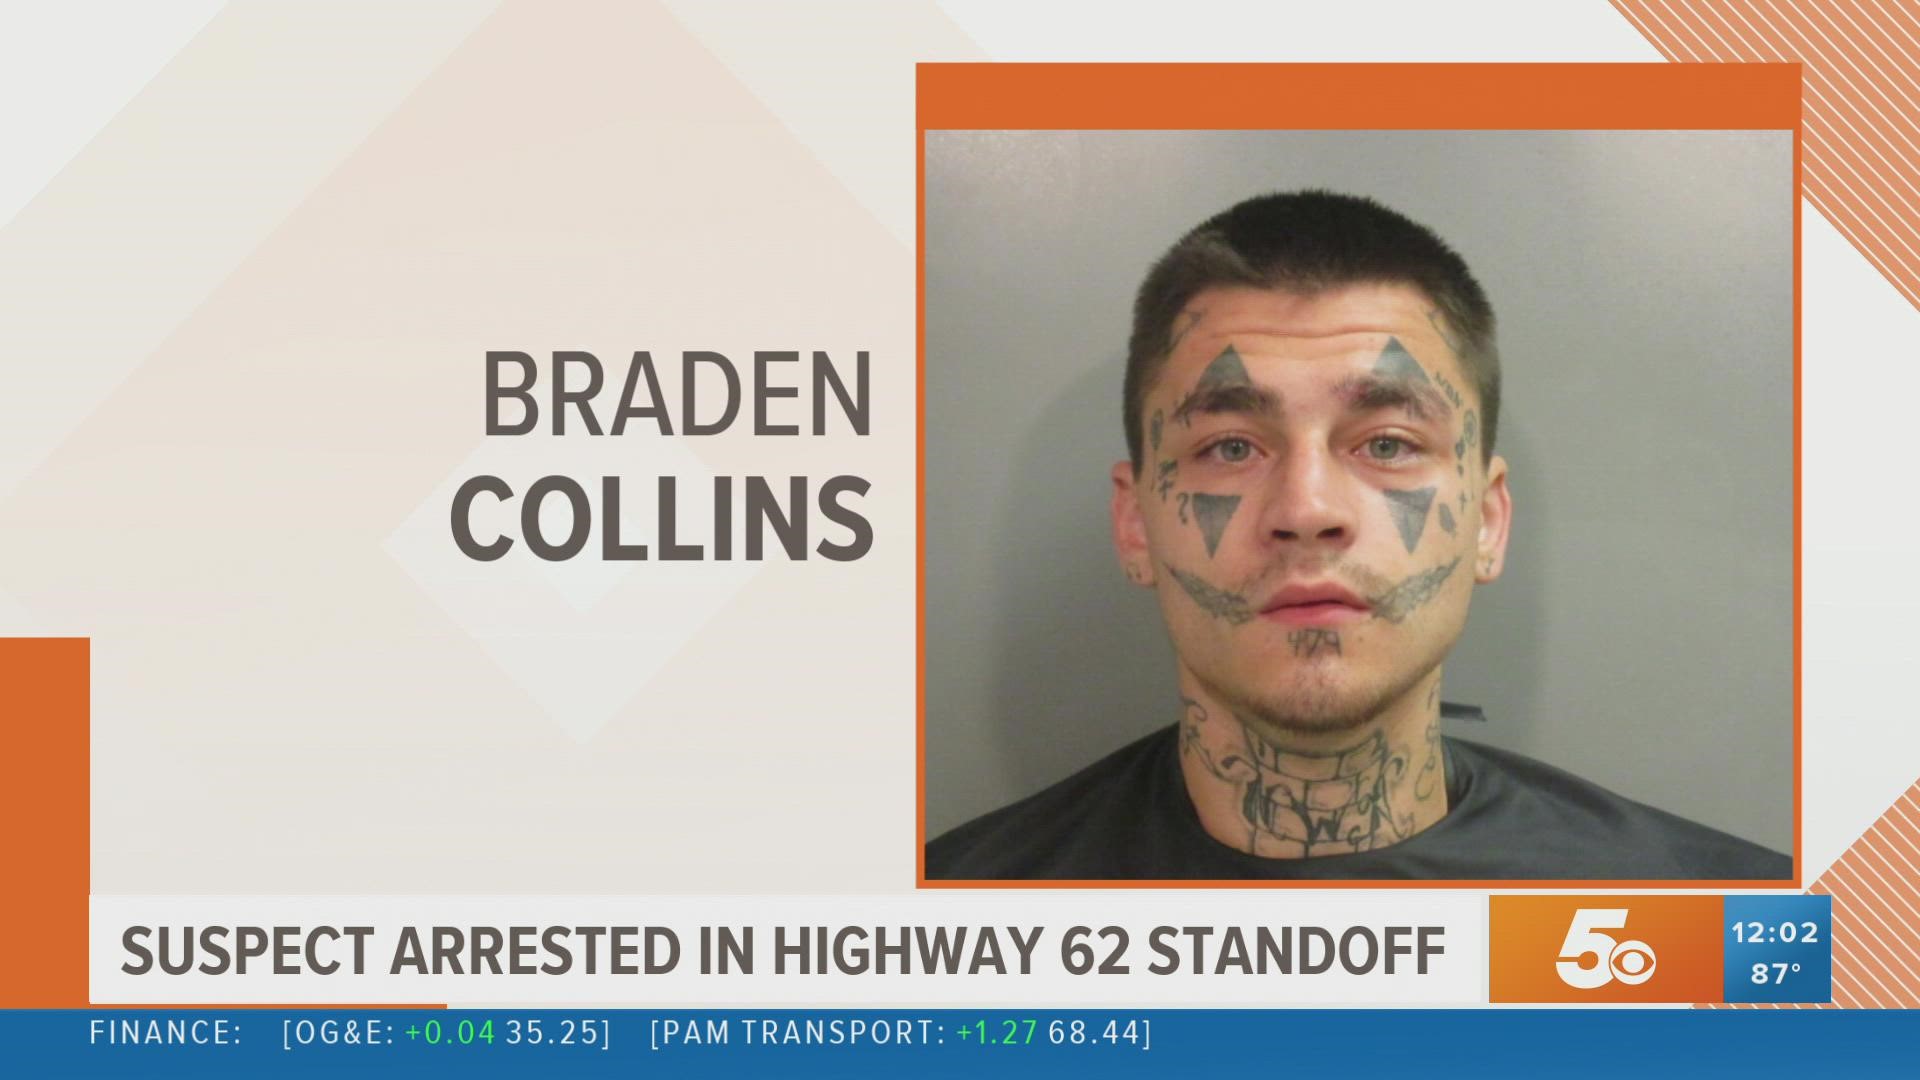 23-year-old Braden Collins was arrested after the incident shut down Hwy. 62 Monday morning.